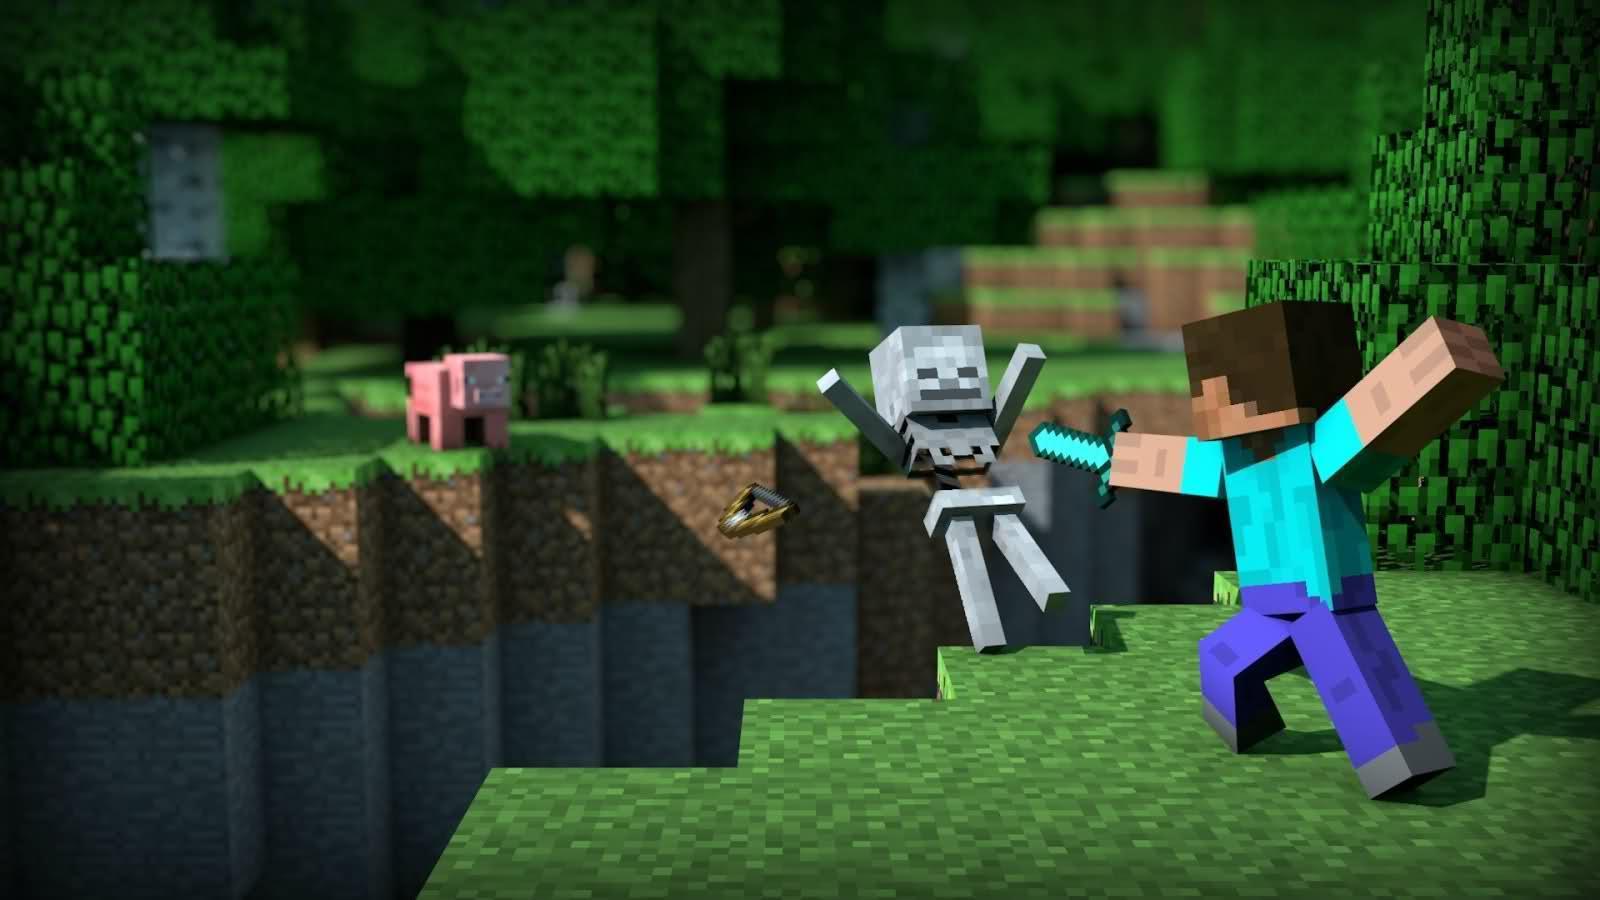 Wallpapers For > Minecraft Wallpapers Hd 1080p